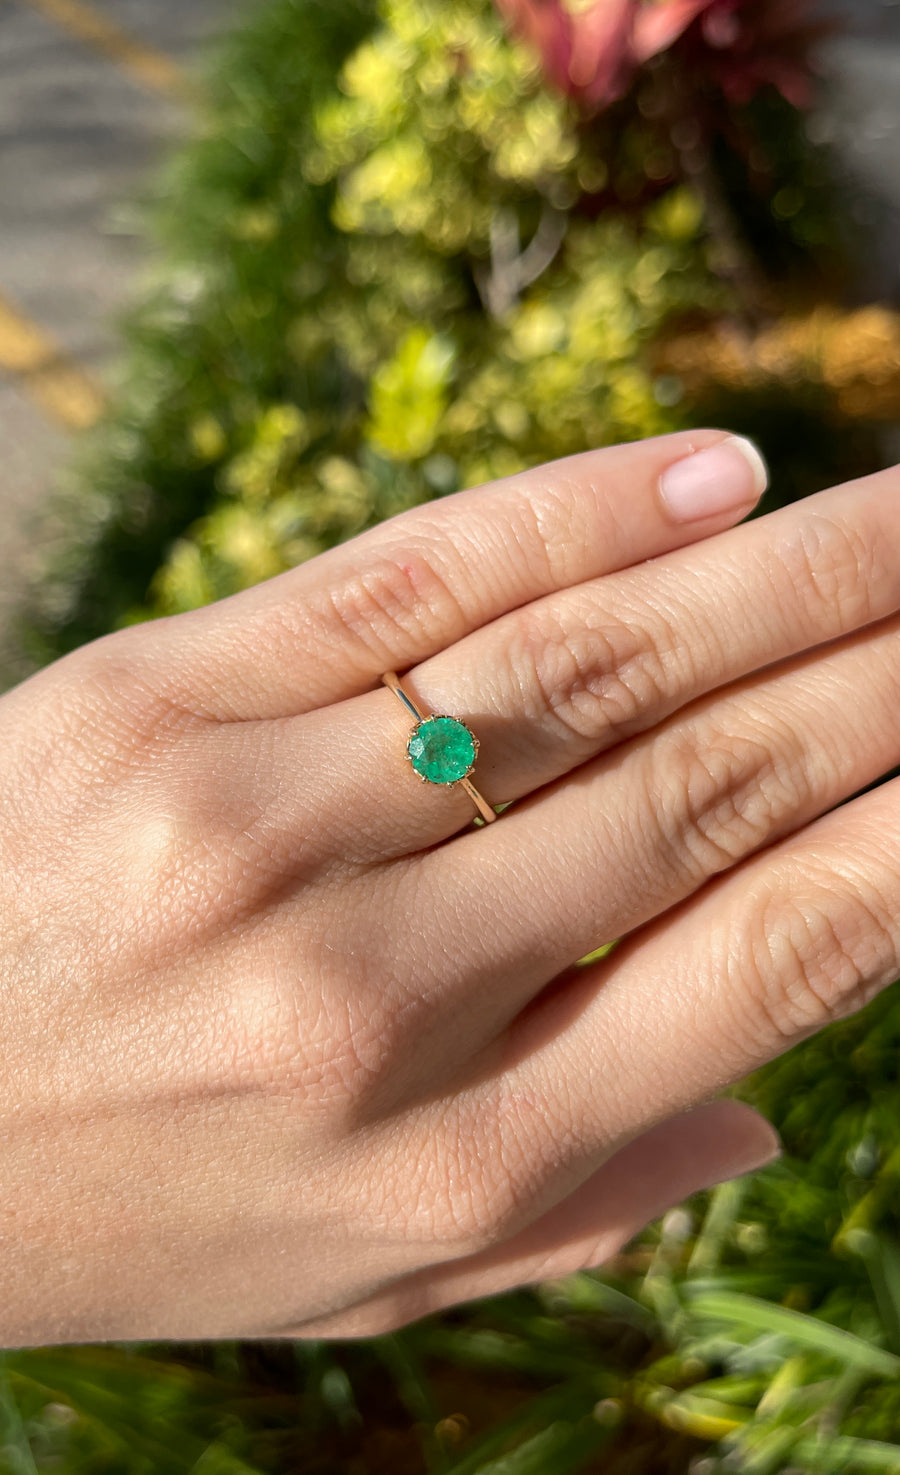 Exquisite Anniversary Gift: 1.0 Carat Round Colombian Emerald Solitaire in 14K Gold Ring